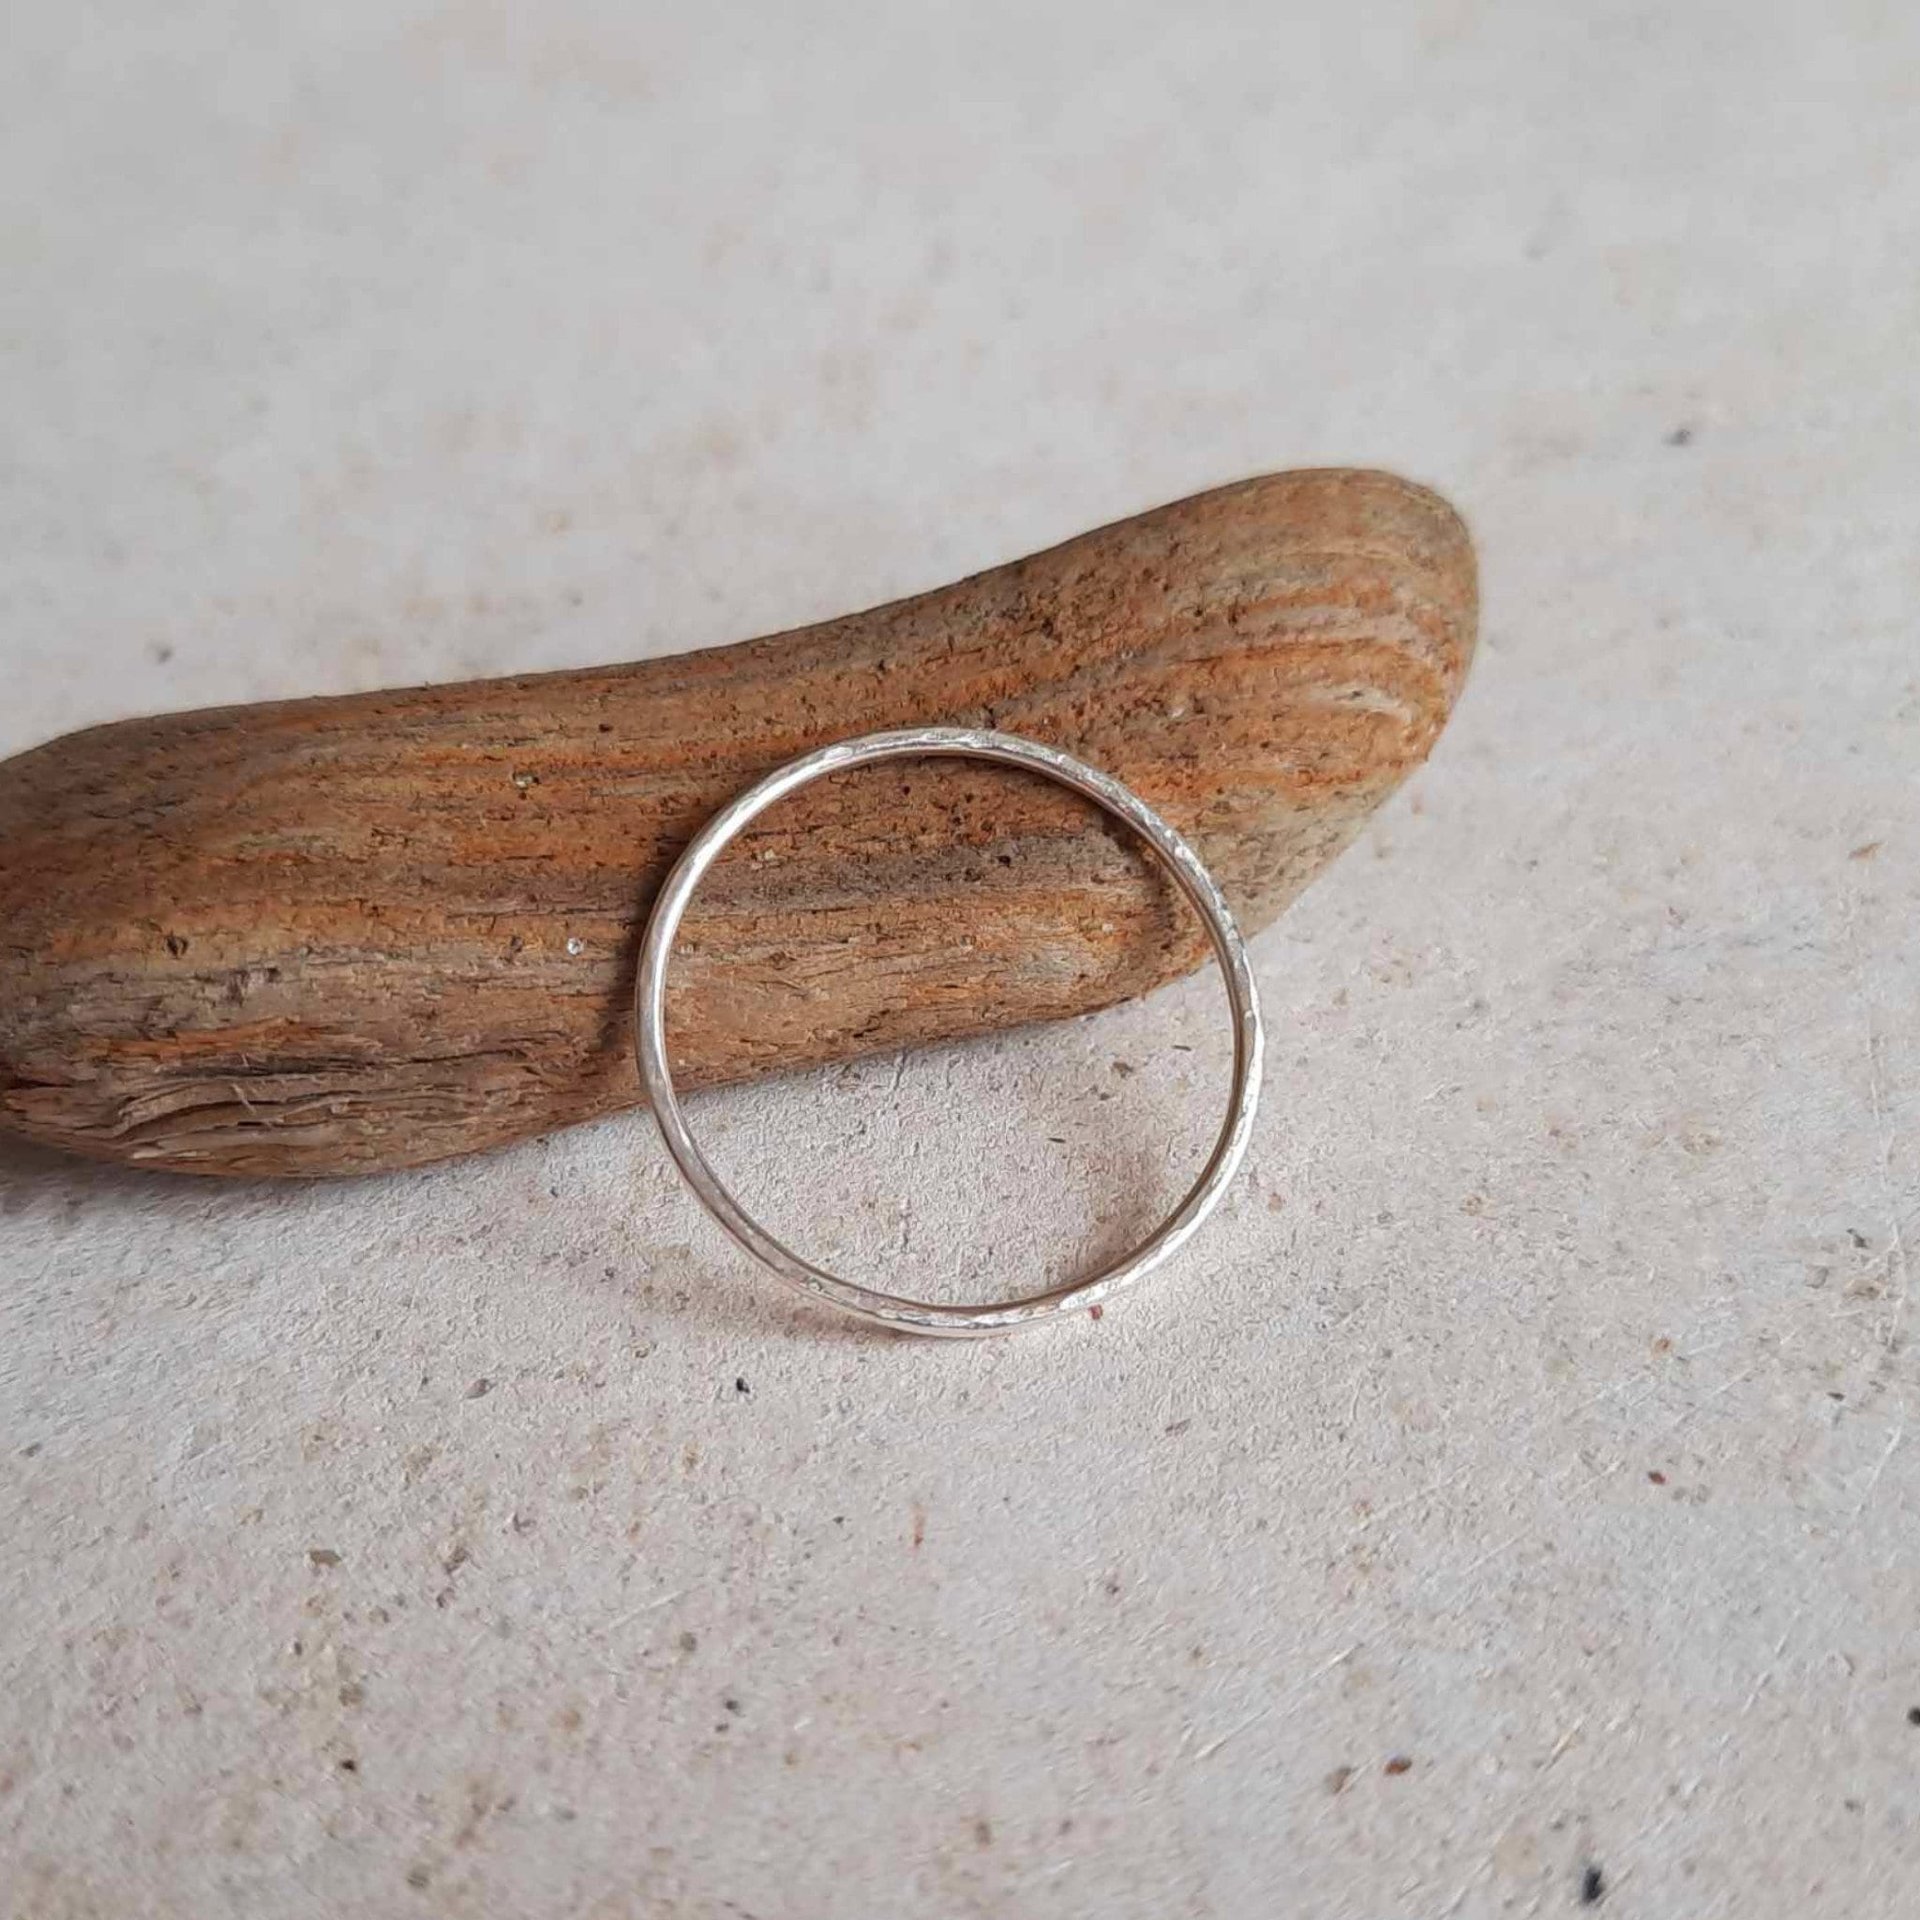 Skinny 925 sterling silver thumb ring, handcrafted by The Tiny Tree Frog Jewellery